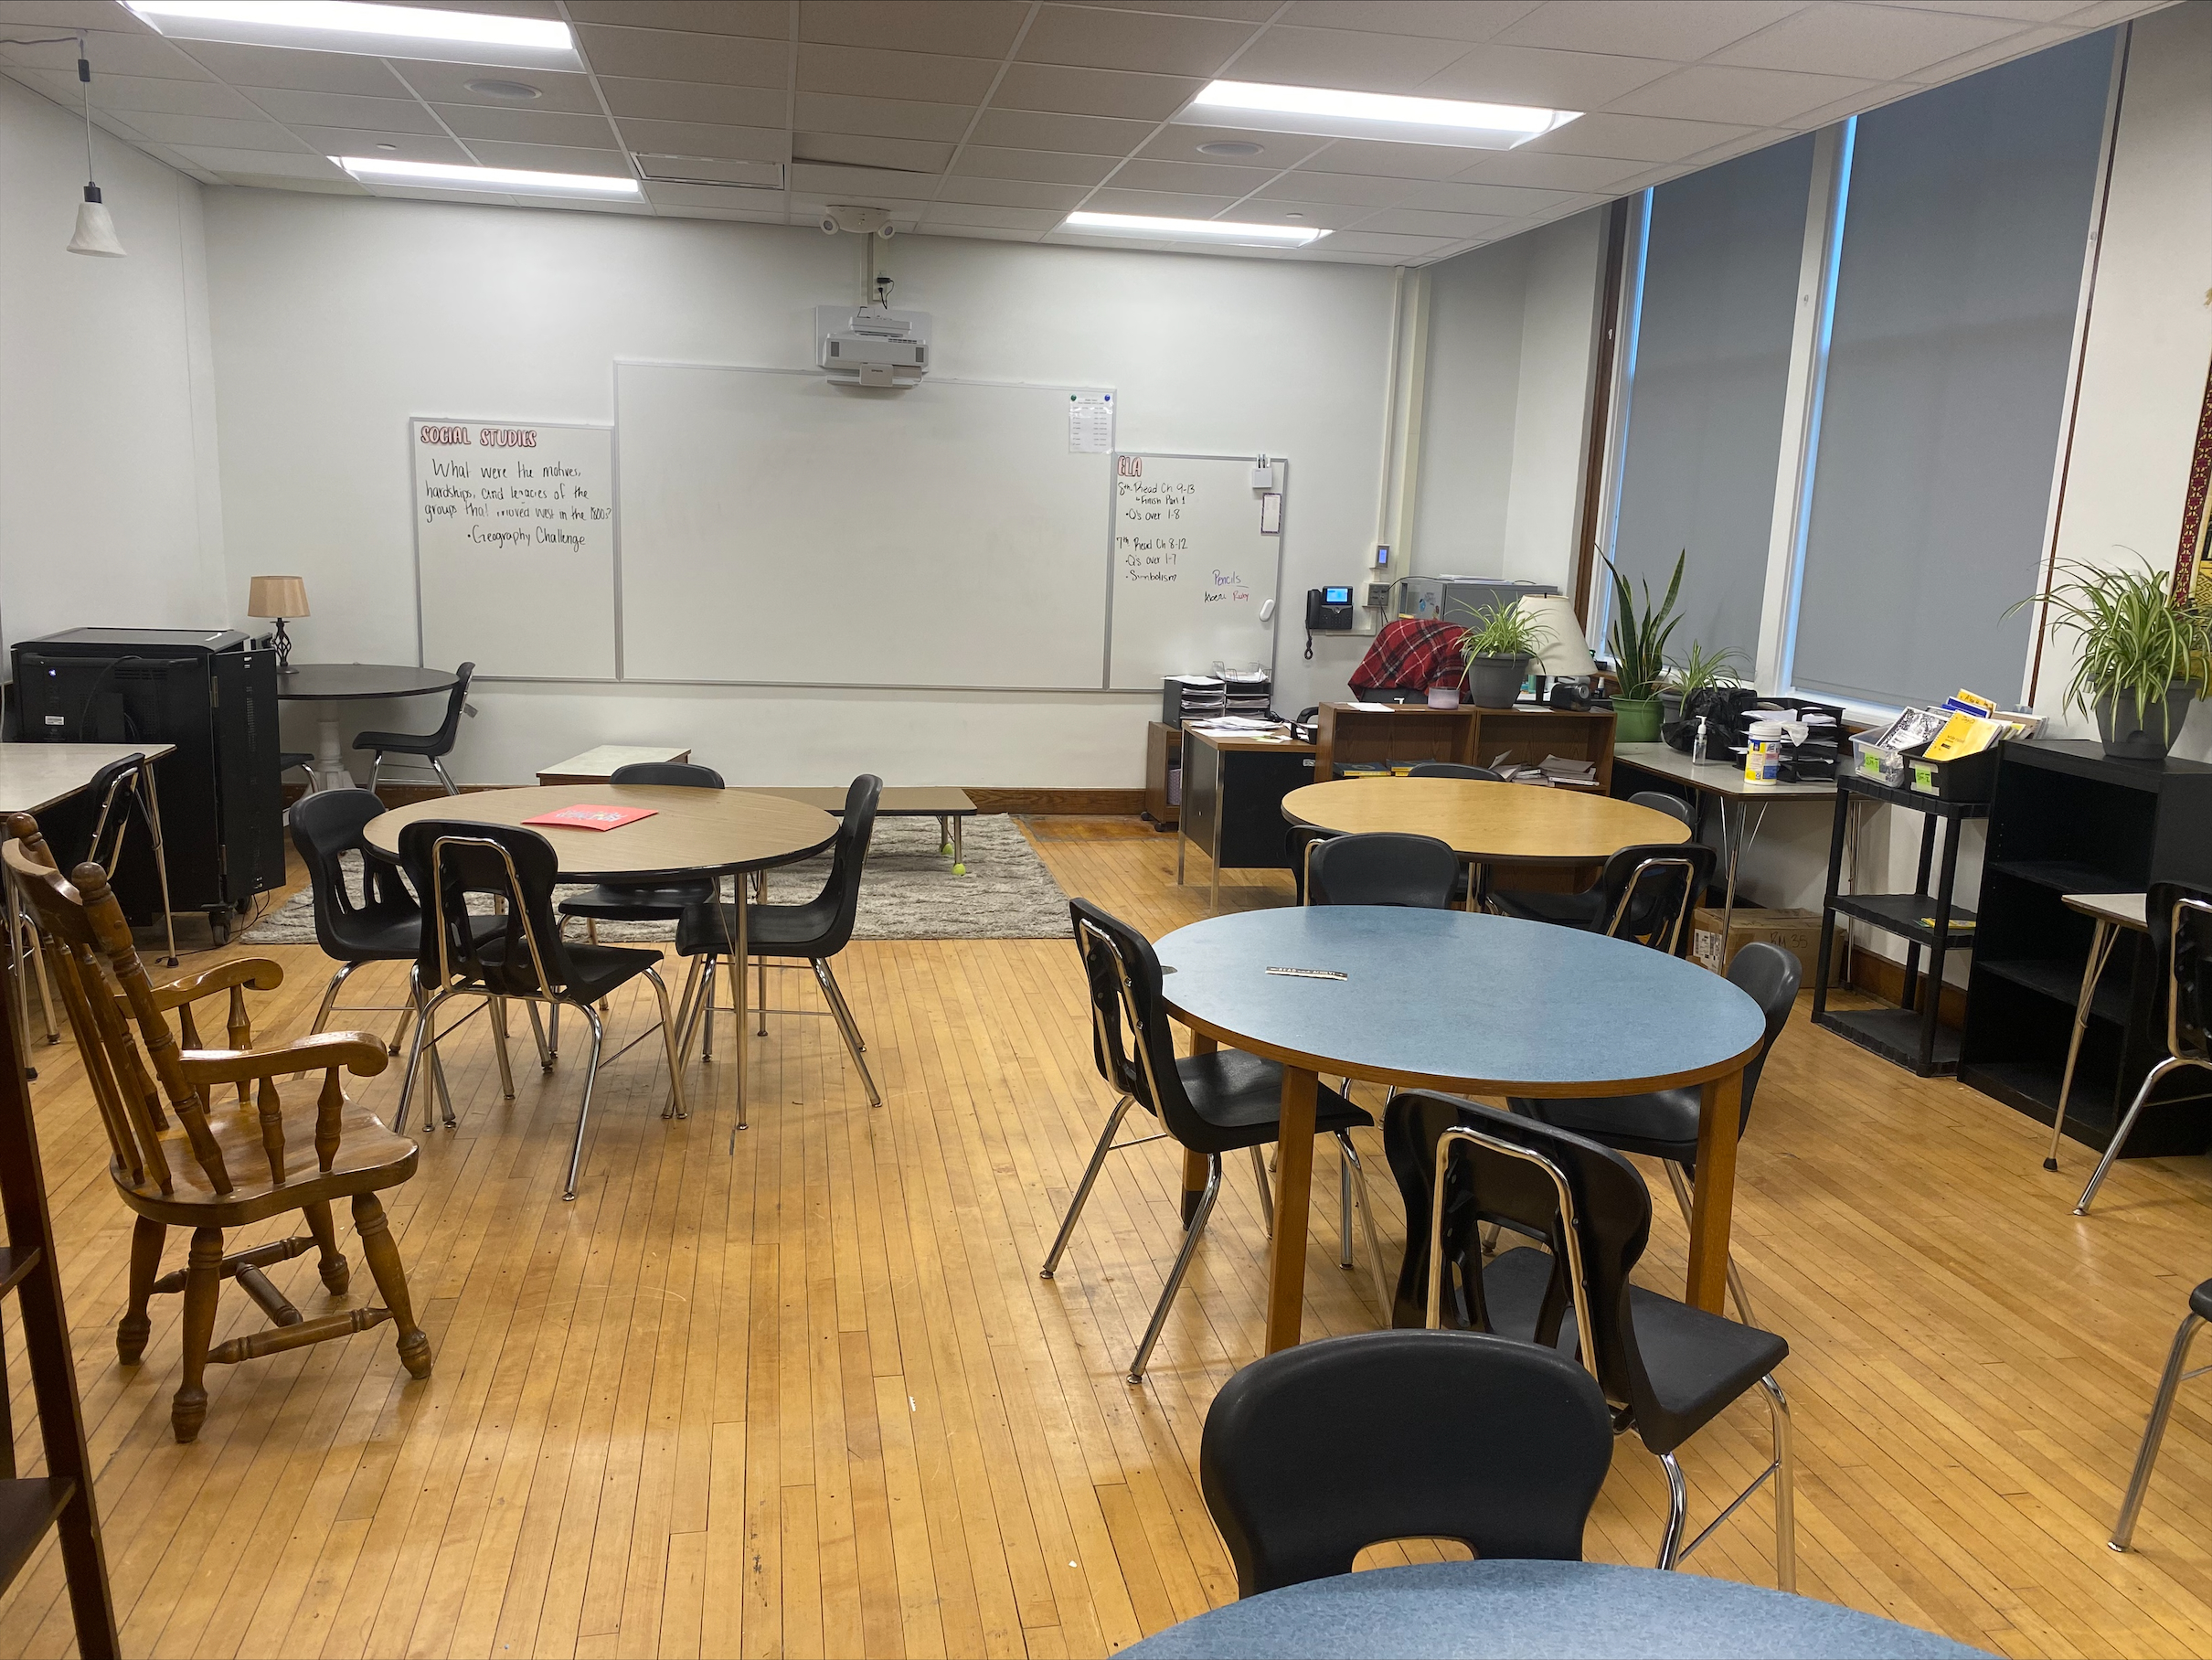 Renovated classroom space for Innovation Central scholars with interactive teaching walls and new projection systems